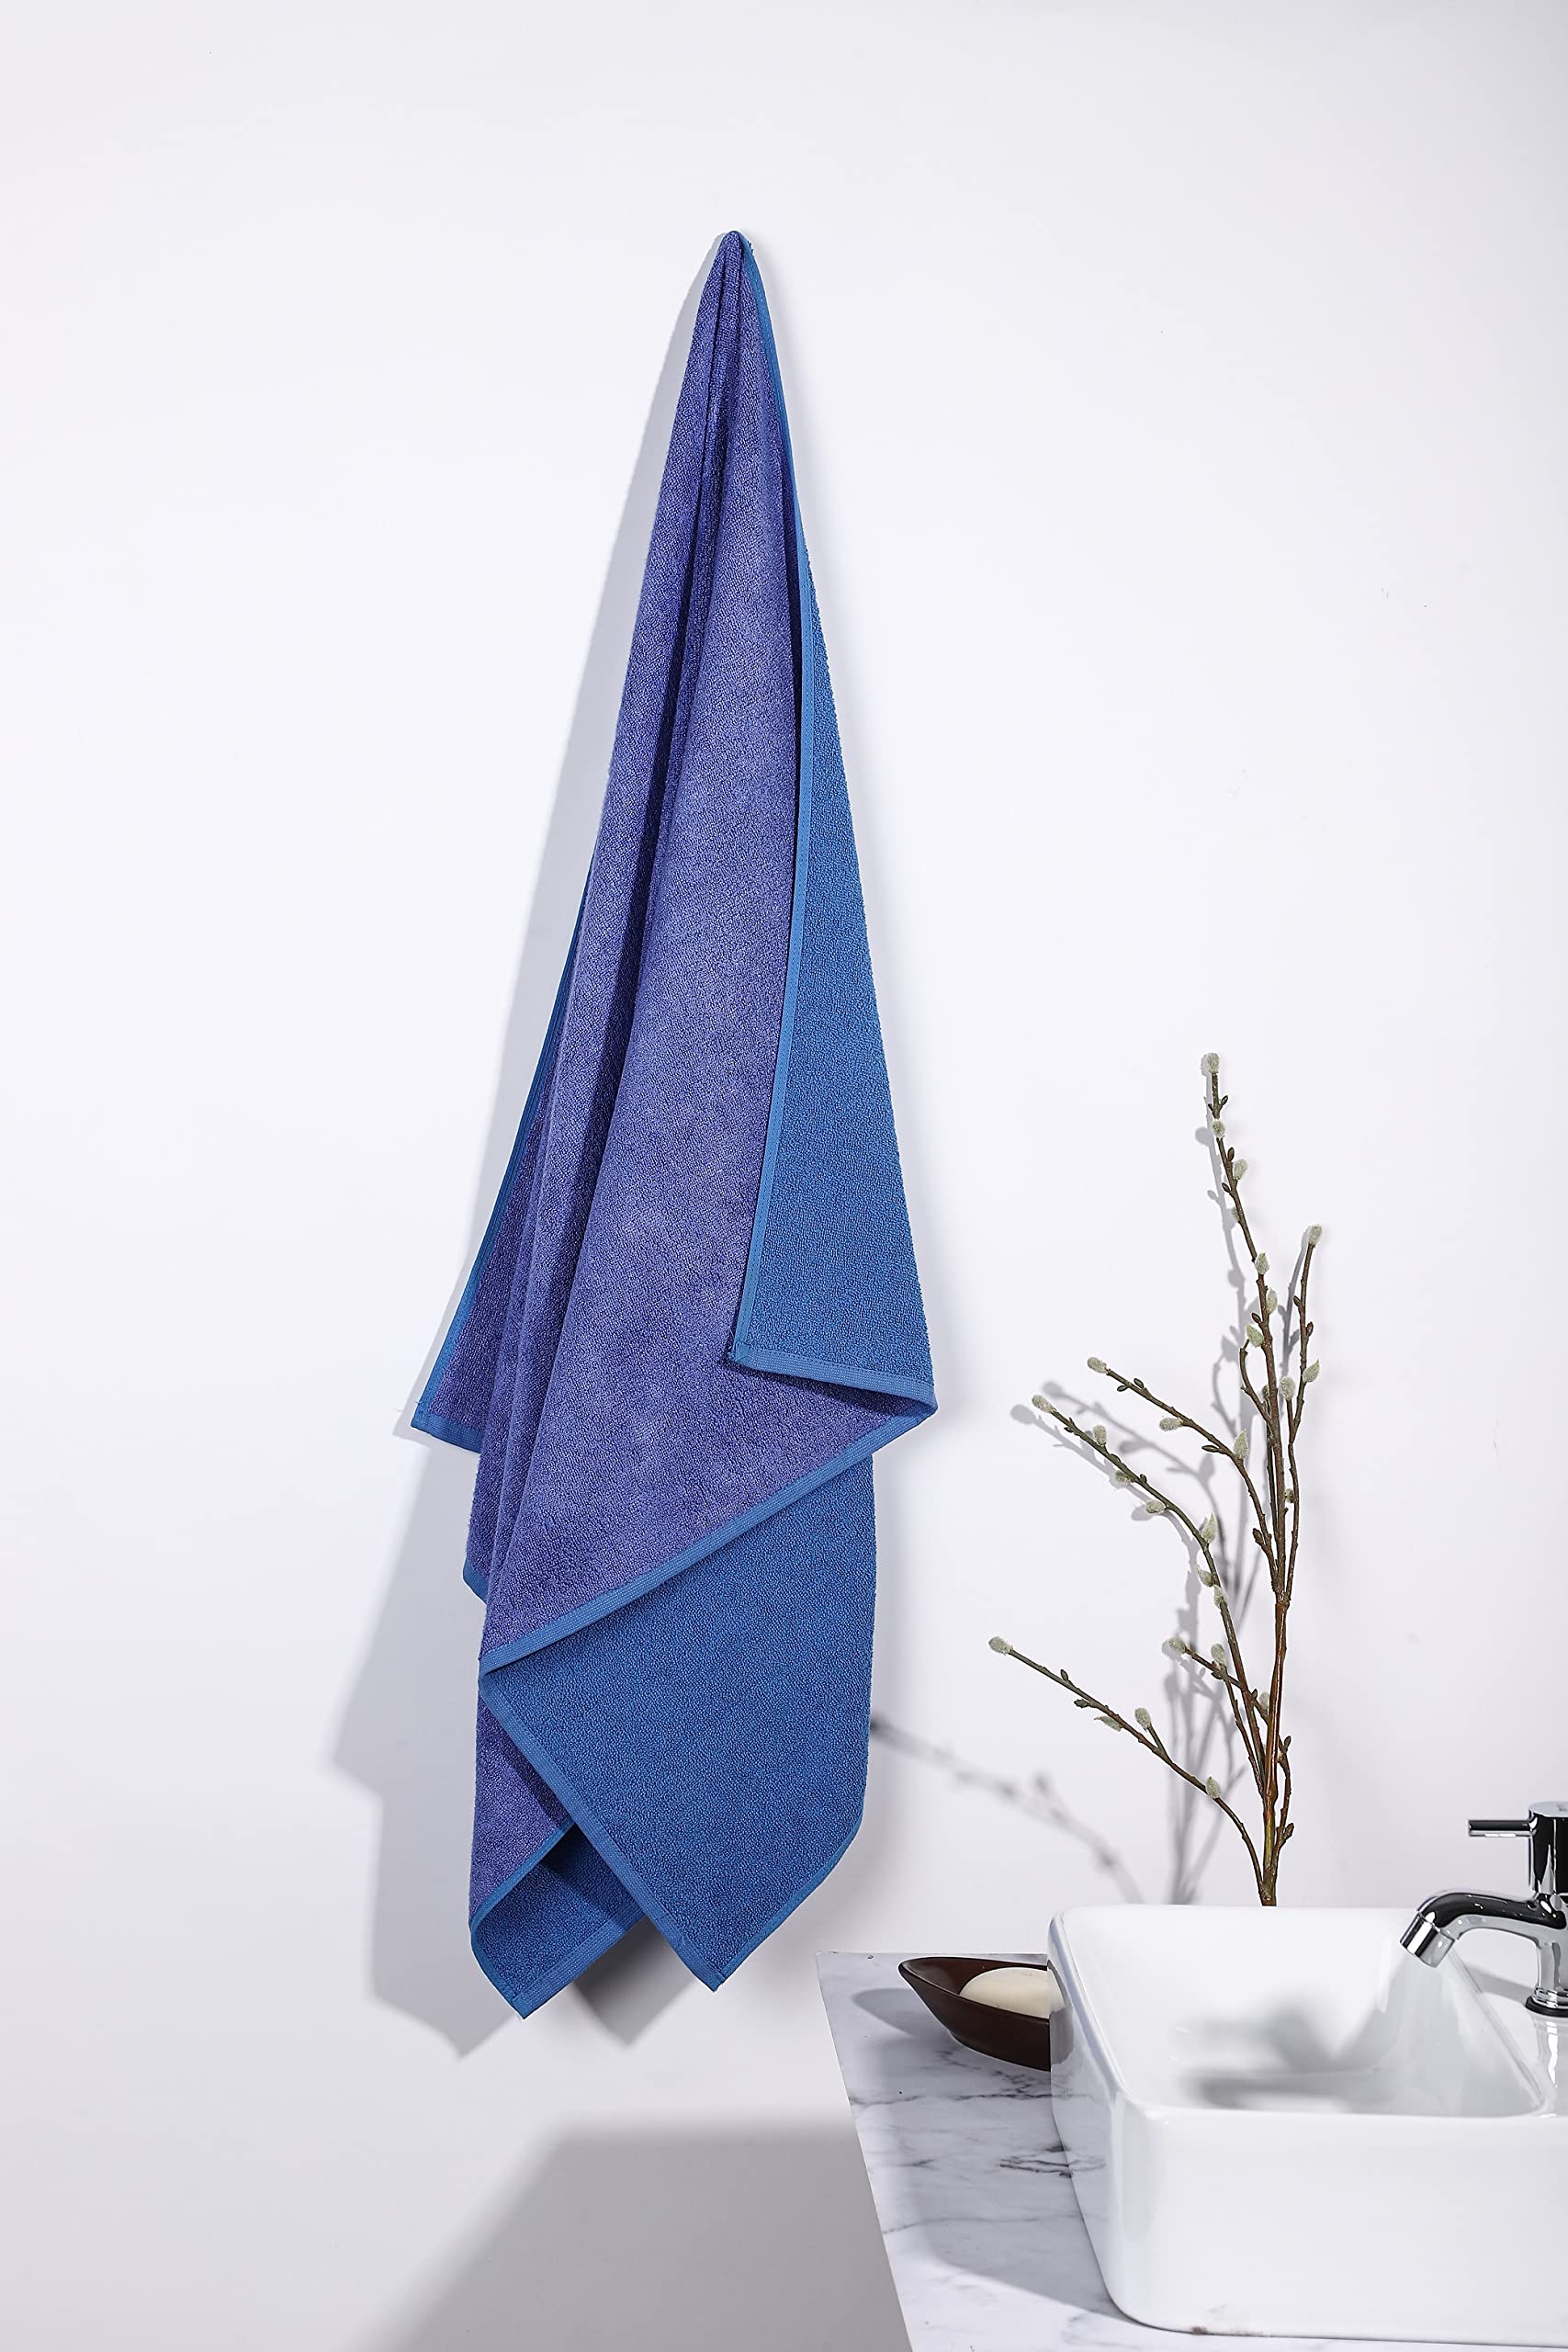 Mush Duo - One Side Soft Bamboo Other Side Rough Cotton - Special Dual Textured Bath Towel for Gentle Cleanse & Exfoliation (2, Ruby Red & Blue Sapphire)